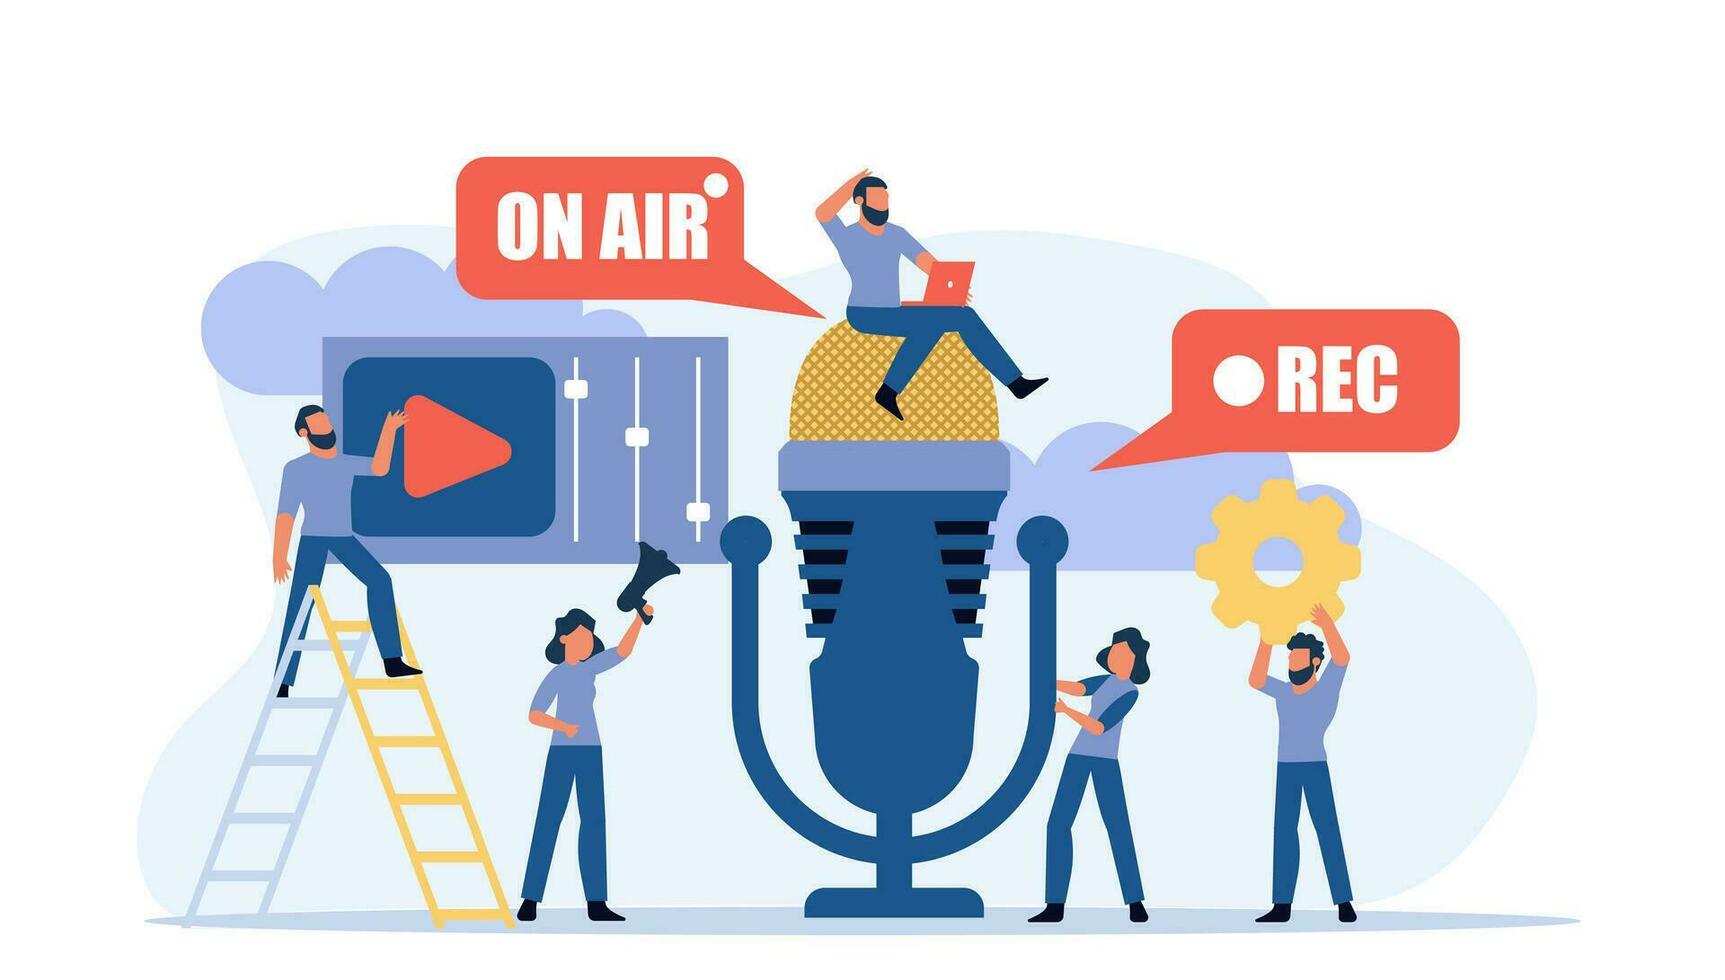 Radio music TV on air live rec interview people vector illustration. Hot news with mic broadcast sound communication studio. Male listen media headphone. Concept record online microphone business